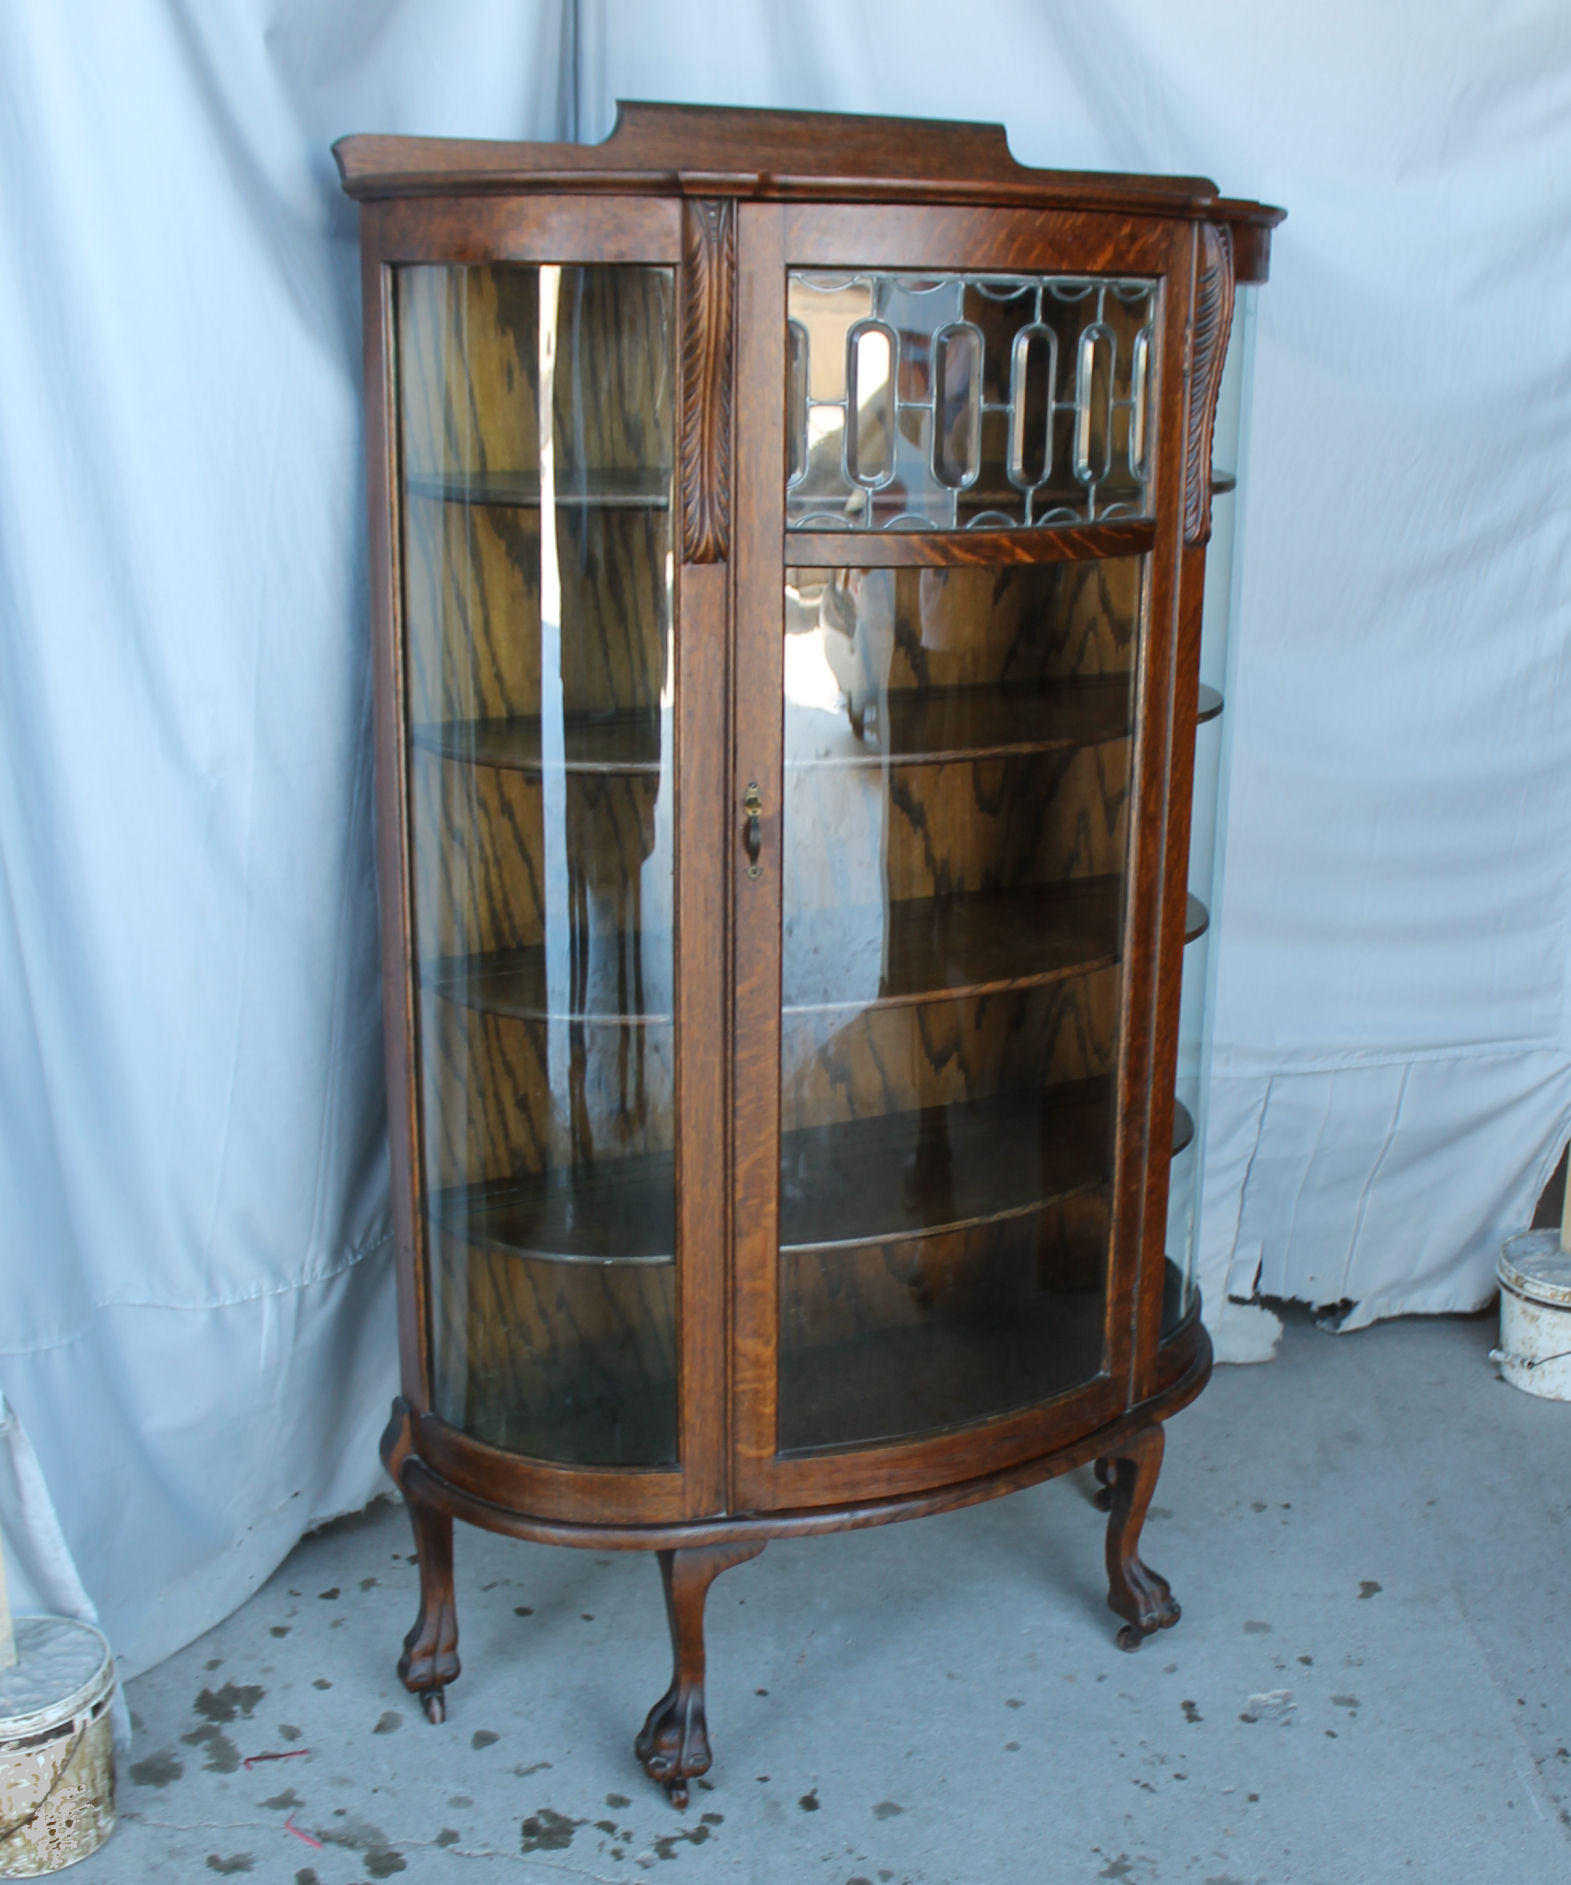 Bargain John S Antiques Oak Curved Glass China Cabinet With